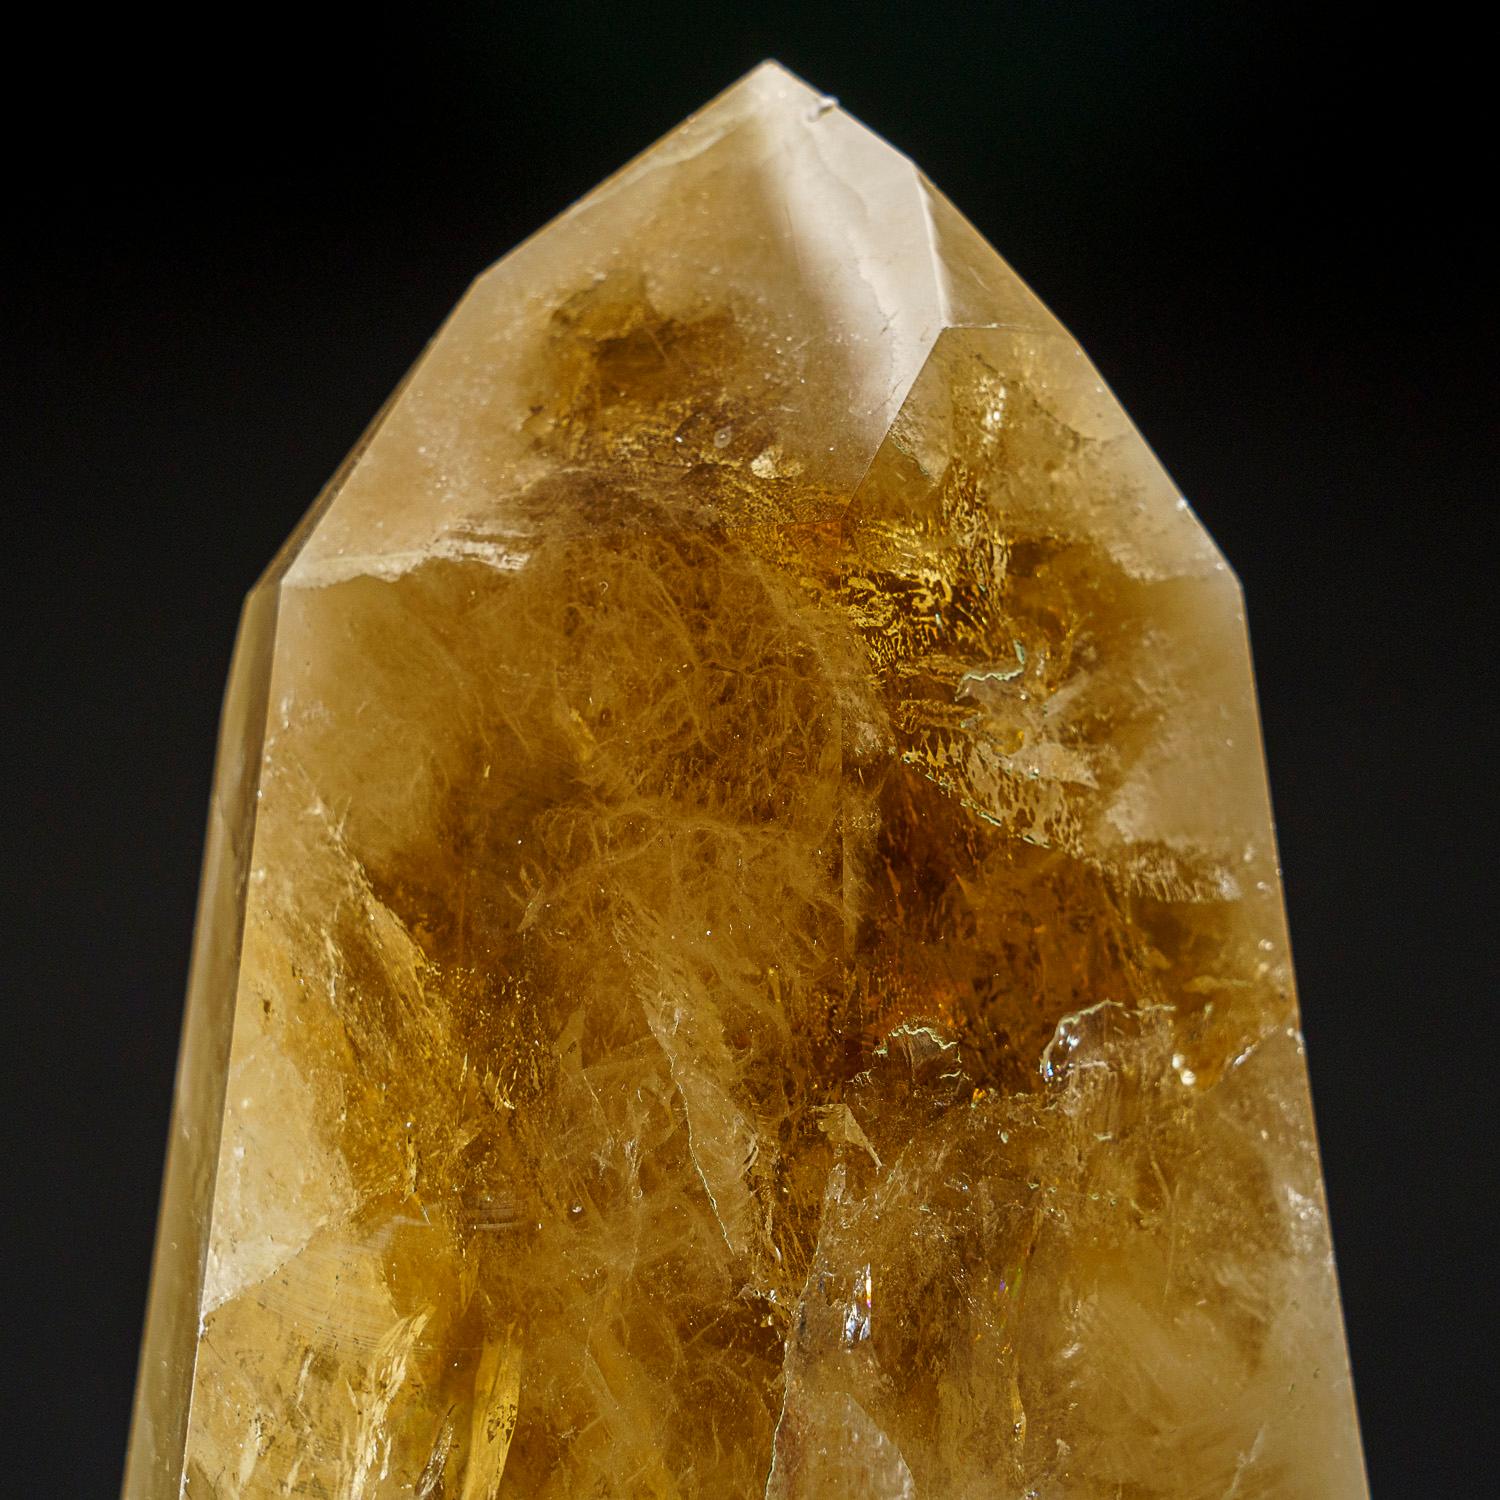 Museum-quality, large crystal of transparent Citrine quartz point with rutile inclusions. This world-class point is extremely large, with top luster and excellent natural smoky yellow color, internally this crystal is flawless.

Citrine can activate